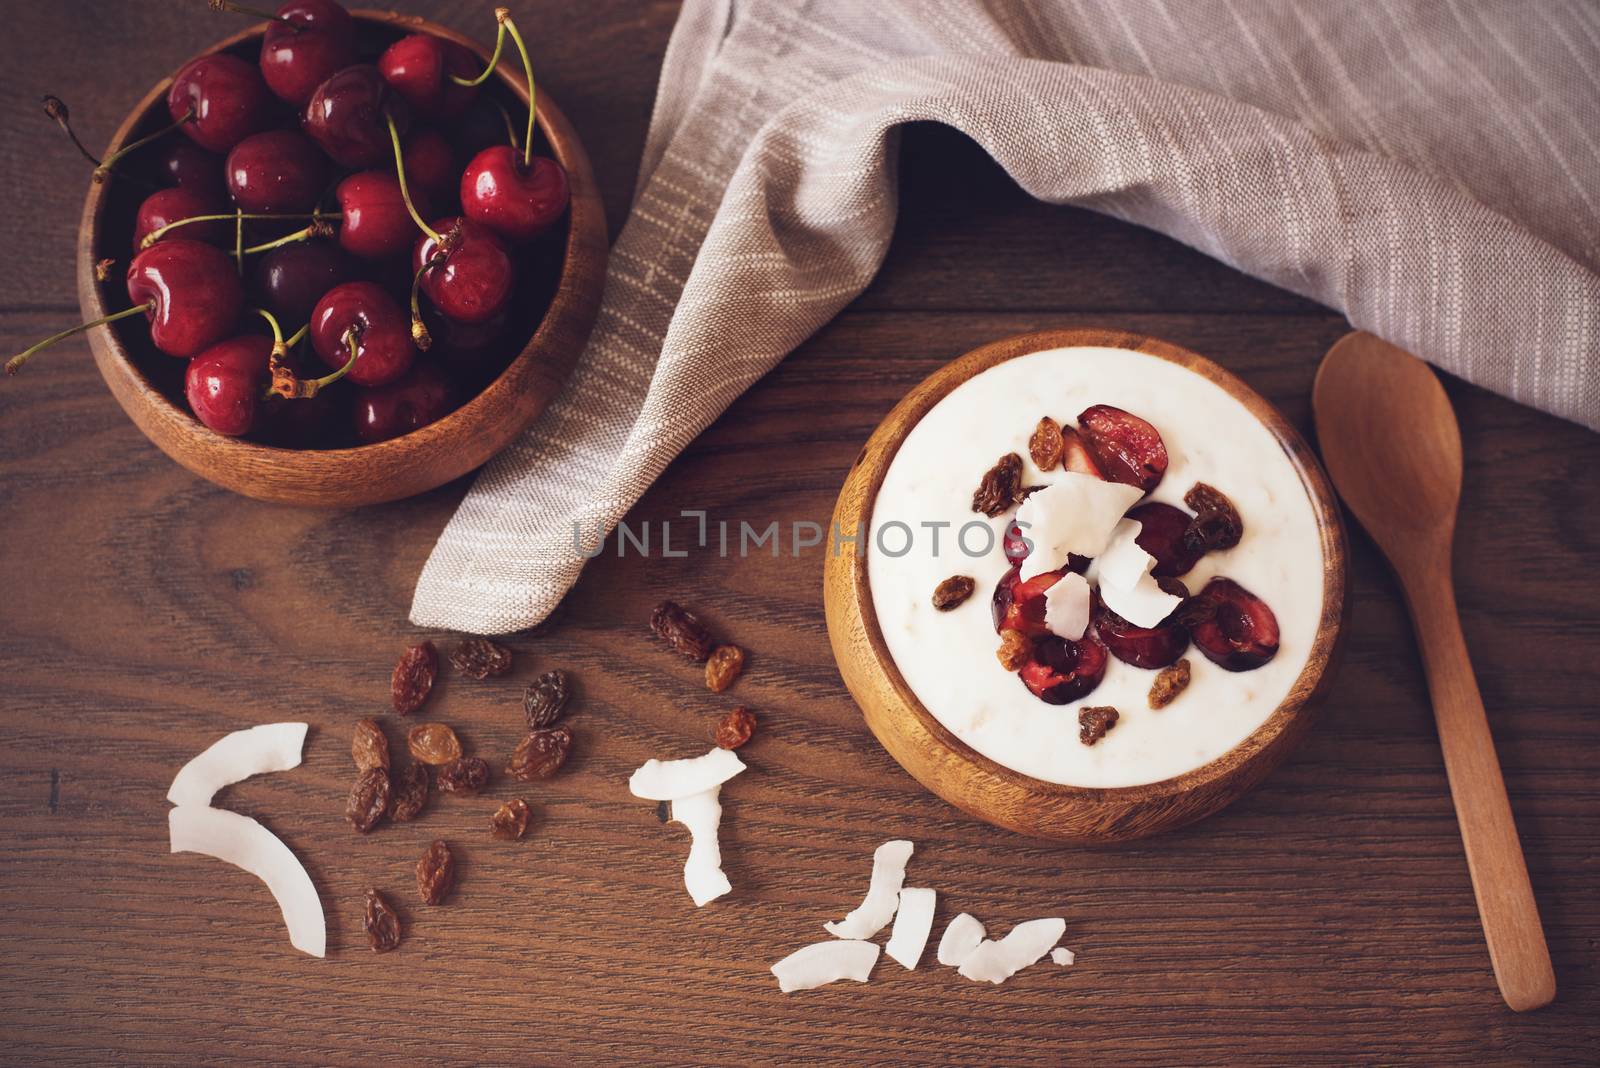 Oat Flakes With Yogurt And Fruits. Cherries, Raisins And Coconut Chips. Overnight Breakfast. Healthy Food Concept. Fitness Mood Diet. Summer Light Snack. Dark Wooden Background. Fawn Filter